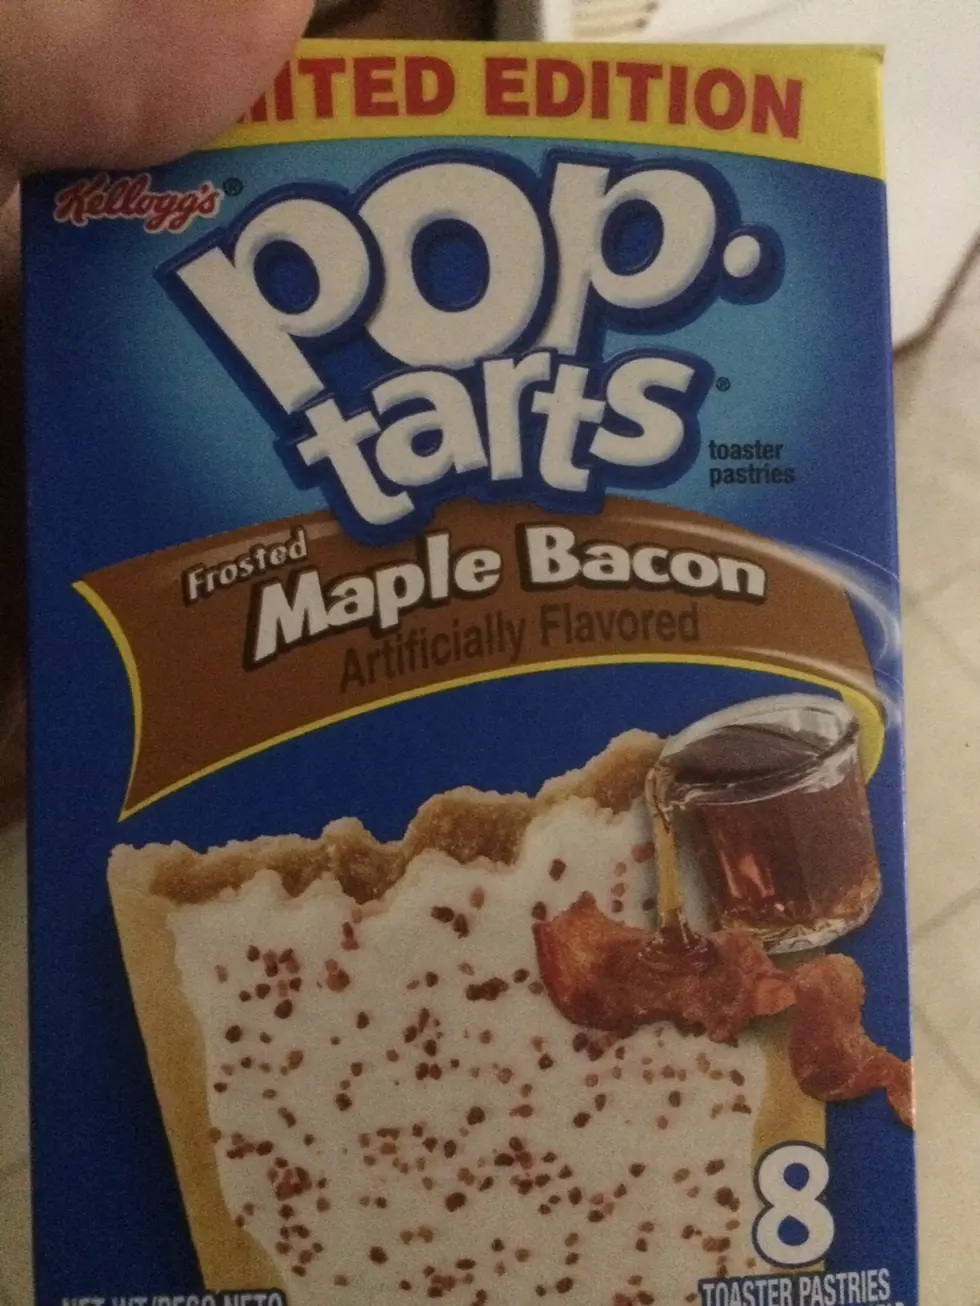 Rob Tries Maple Bacon Pop-Tarts...So You'll Know If You Should Buy Them